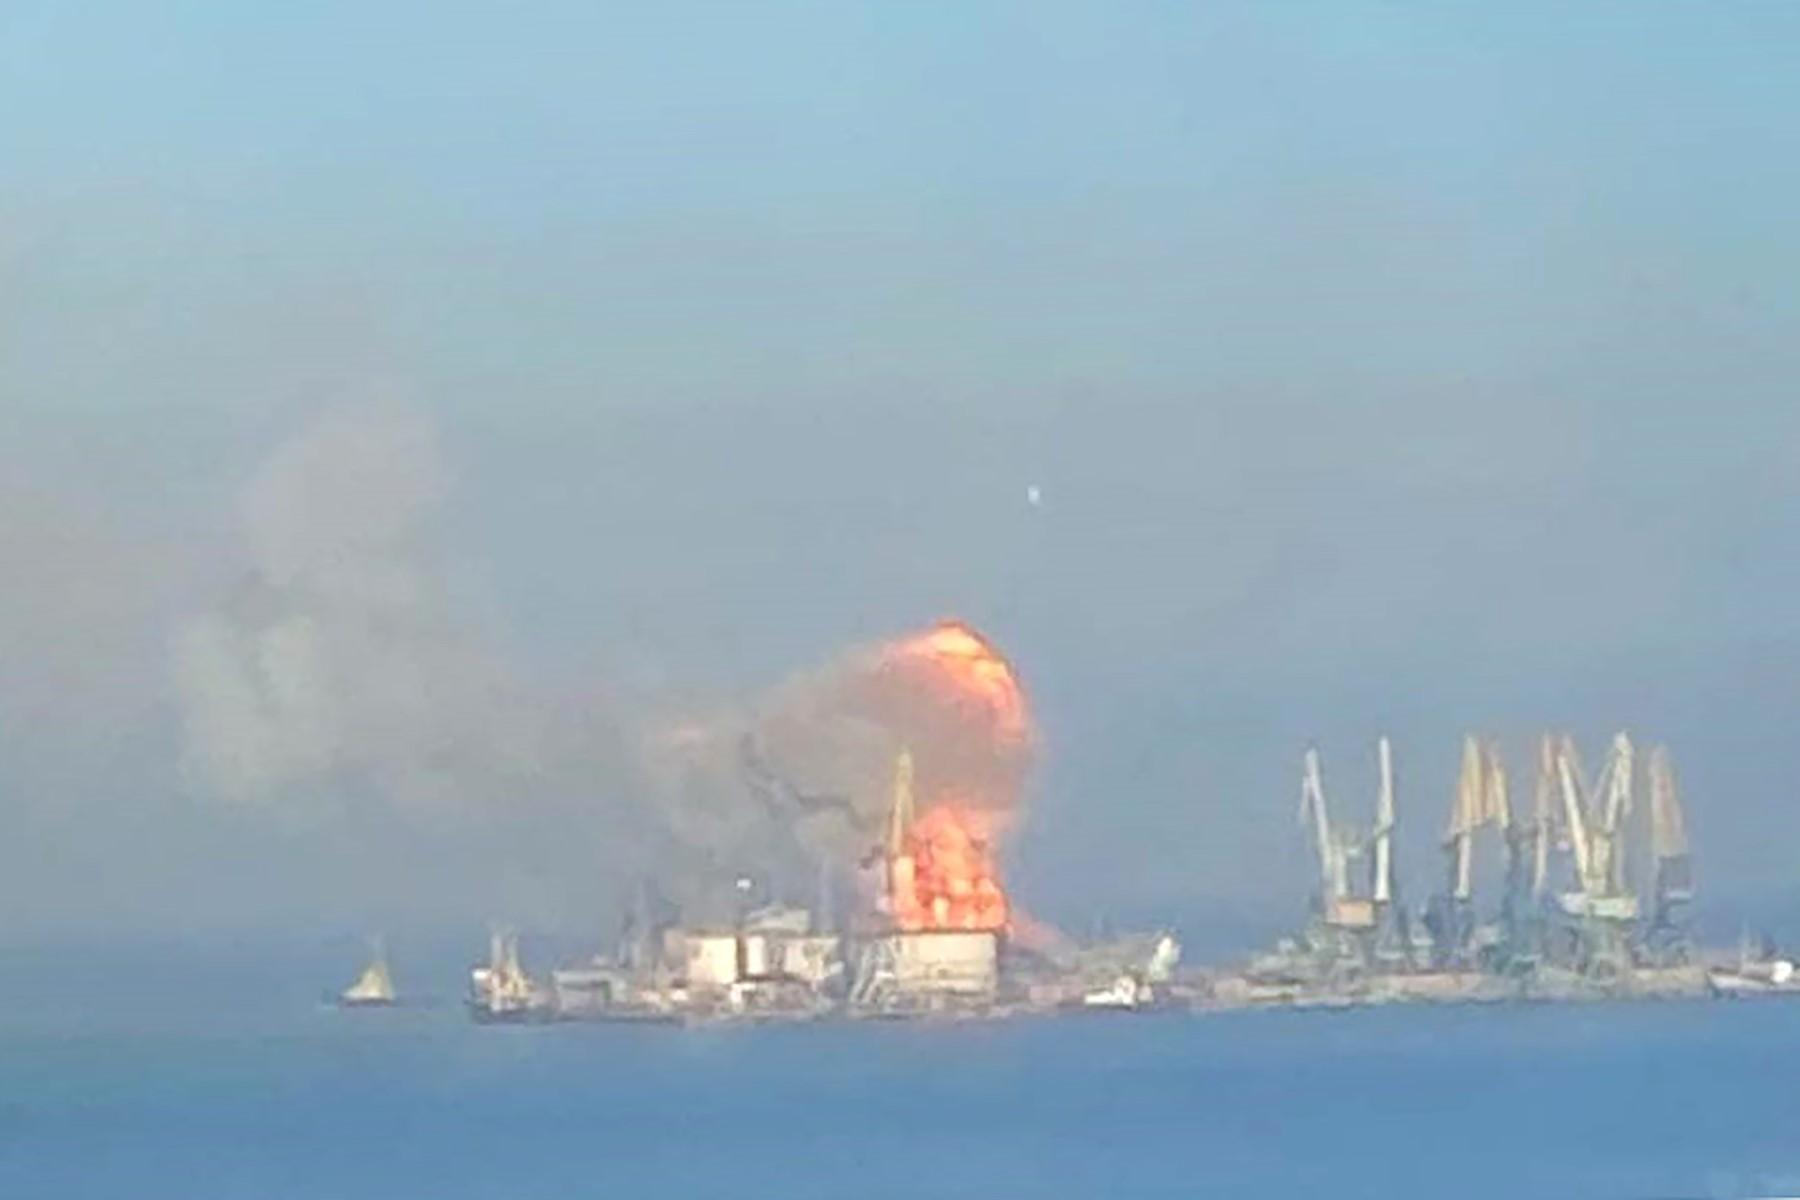 A handout picture released by the Ukrainian Navy on March 24, shows plumes of smoke and flames in the port of Berdyansk in the Azov Sea, 80km to the west of Mariupol, on the site where reportedly the large landing ship 'Orsk' of the Russian Black Sea Fleet is docked. Photo: AFP